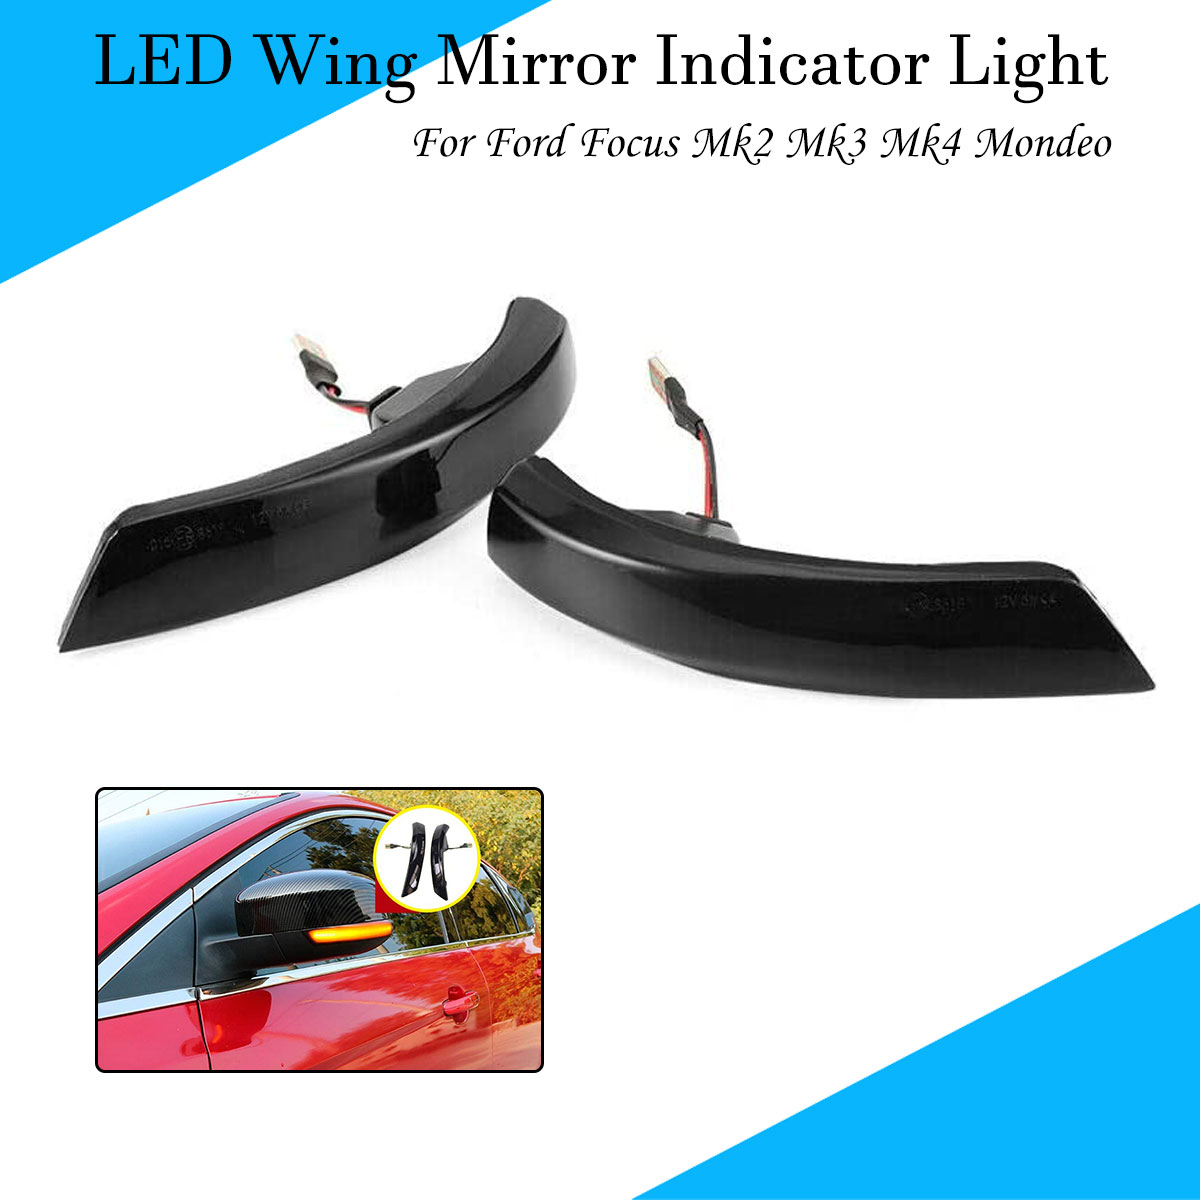 2PCS DRIVER WING MIRROR INDICATOR REPEATER LIGHT FOR FORD FOCUS 2008-2018